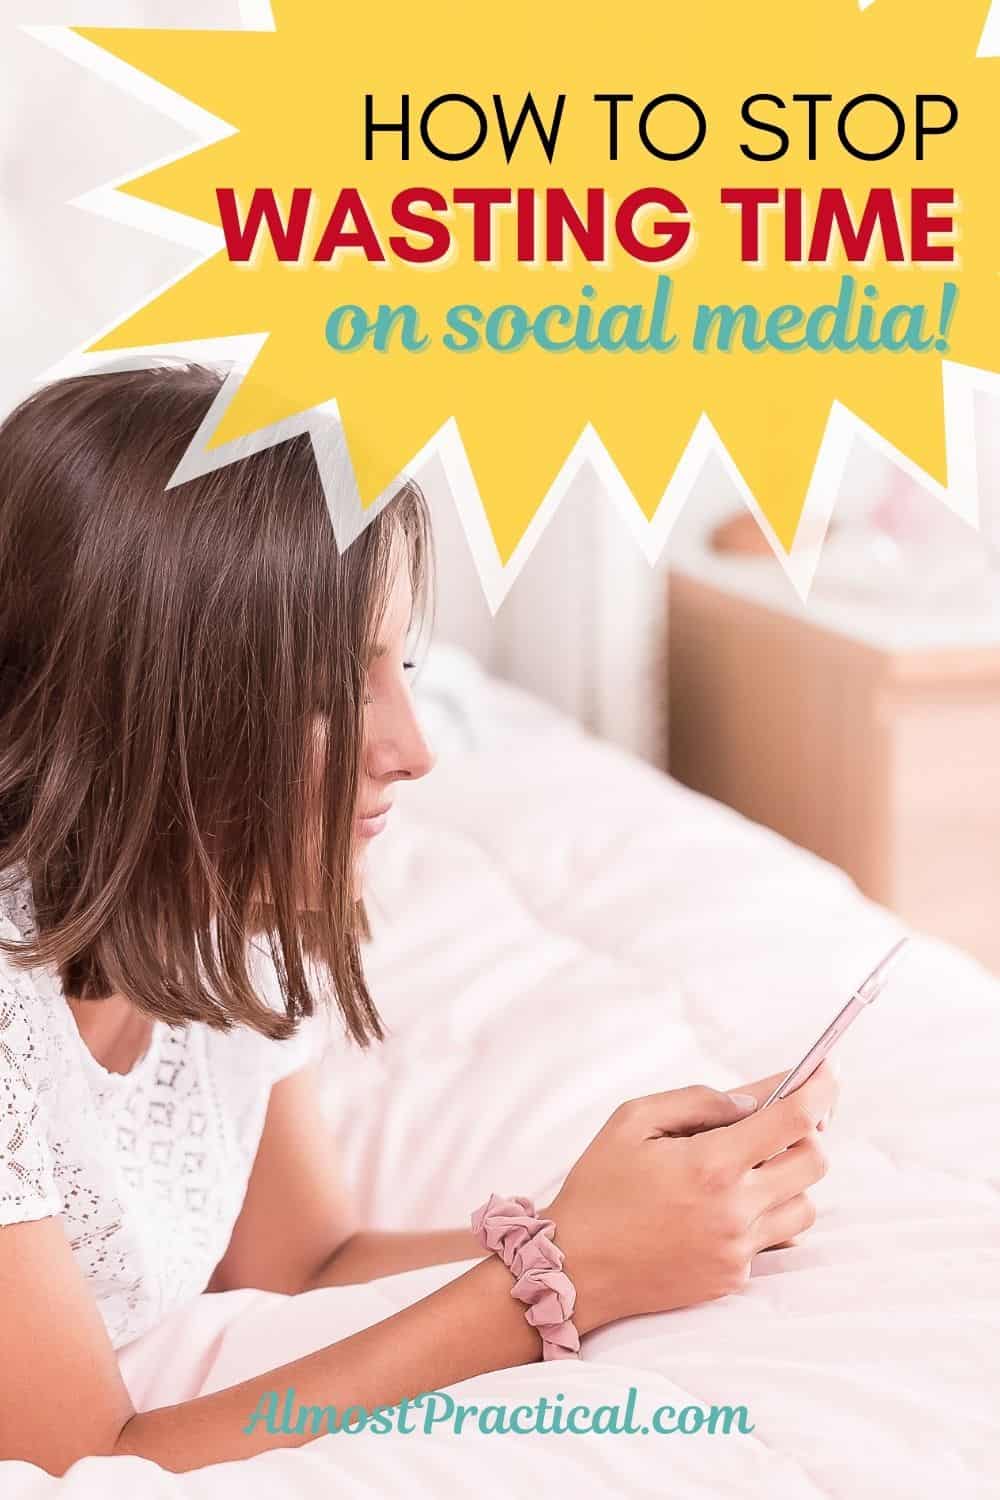 How to Stop Wasting Time on Social Media